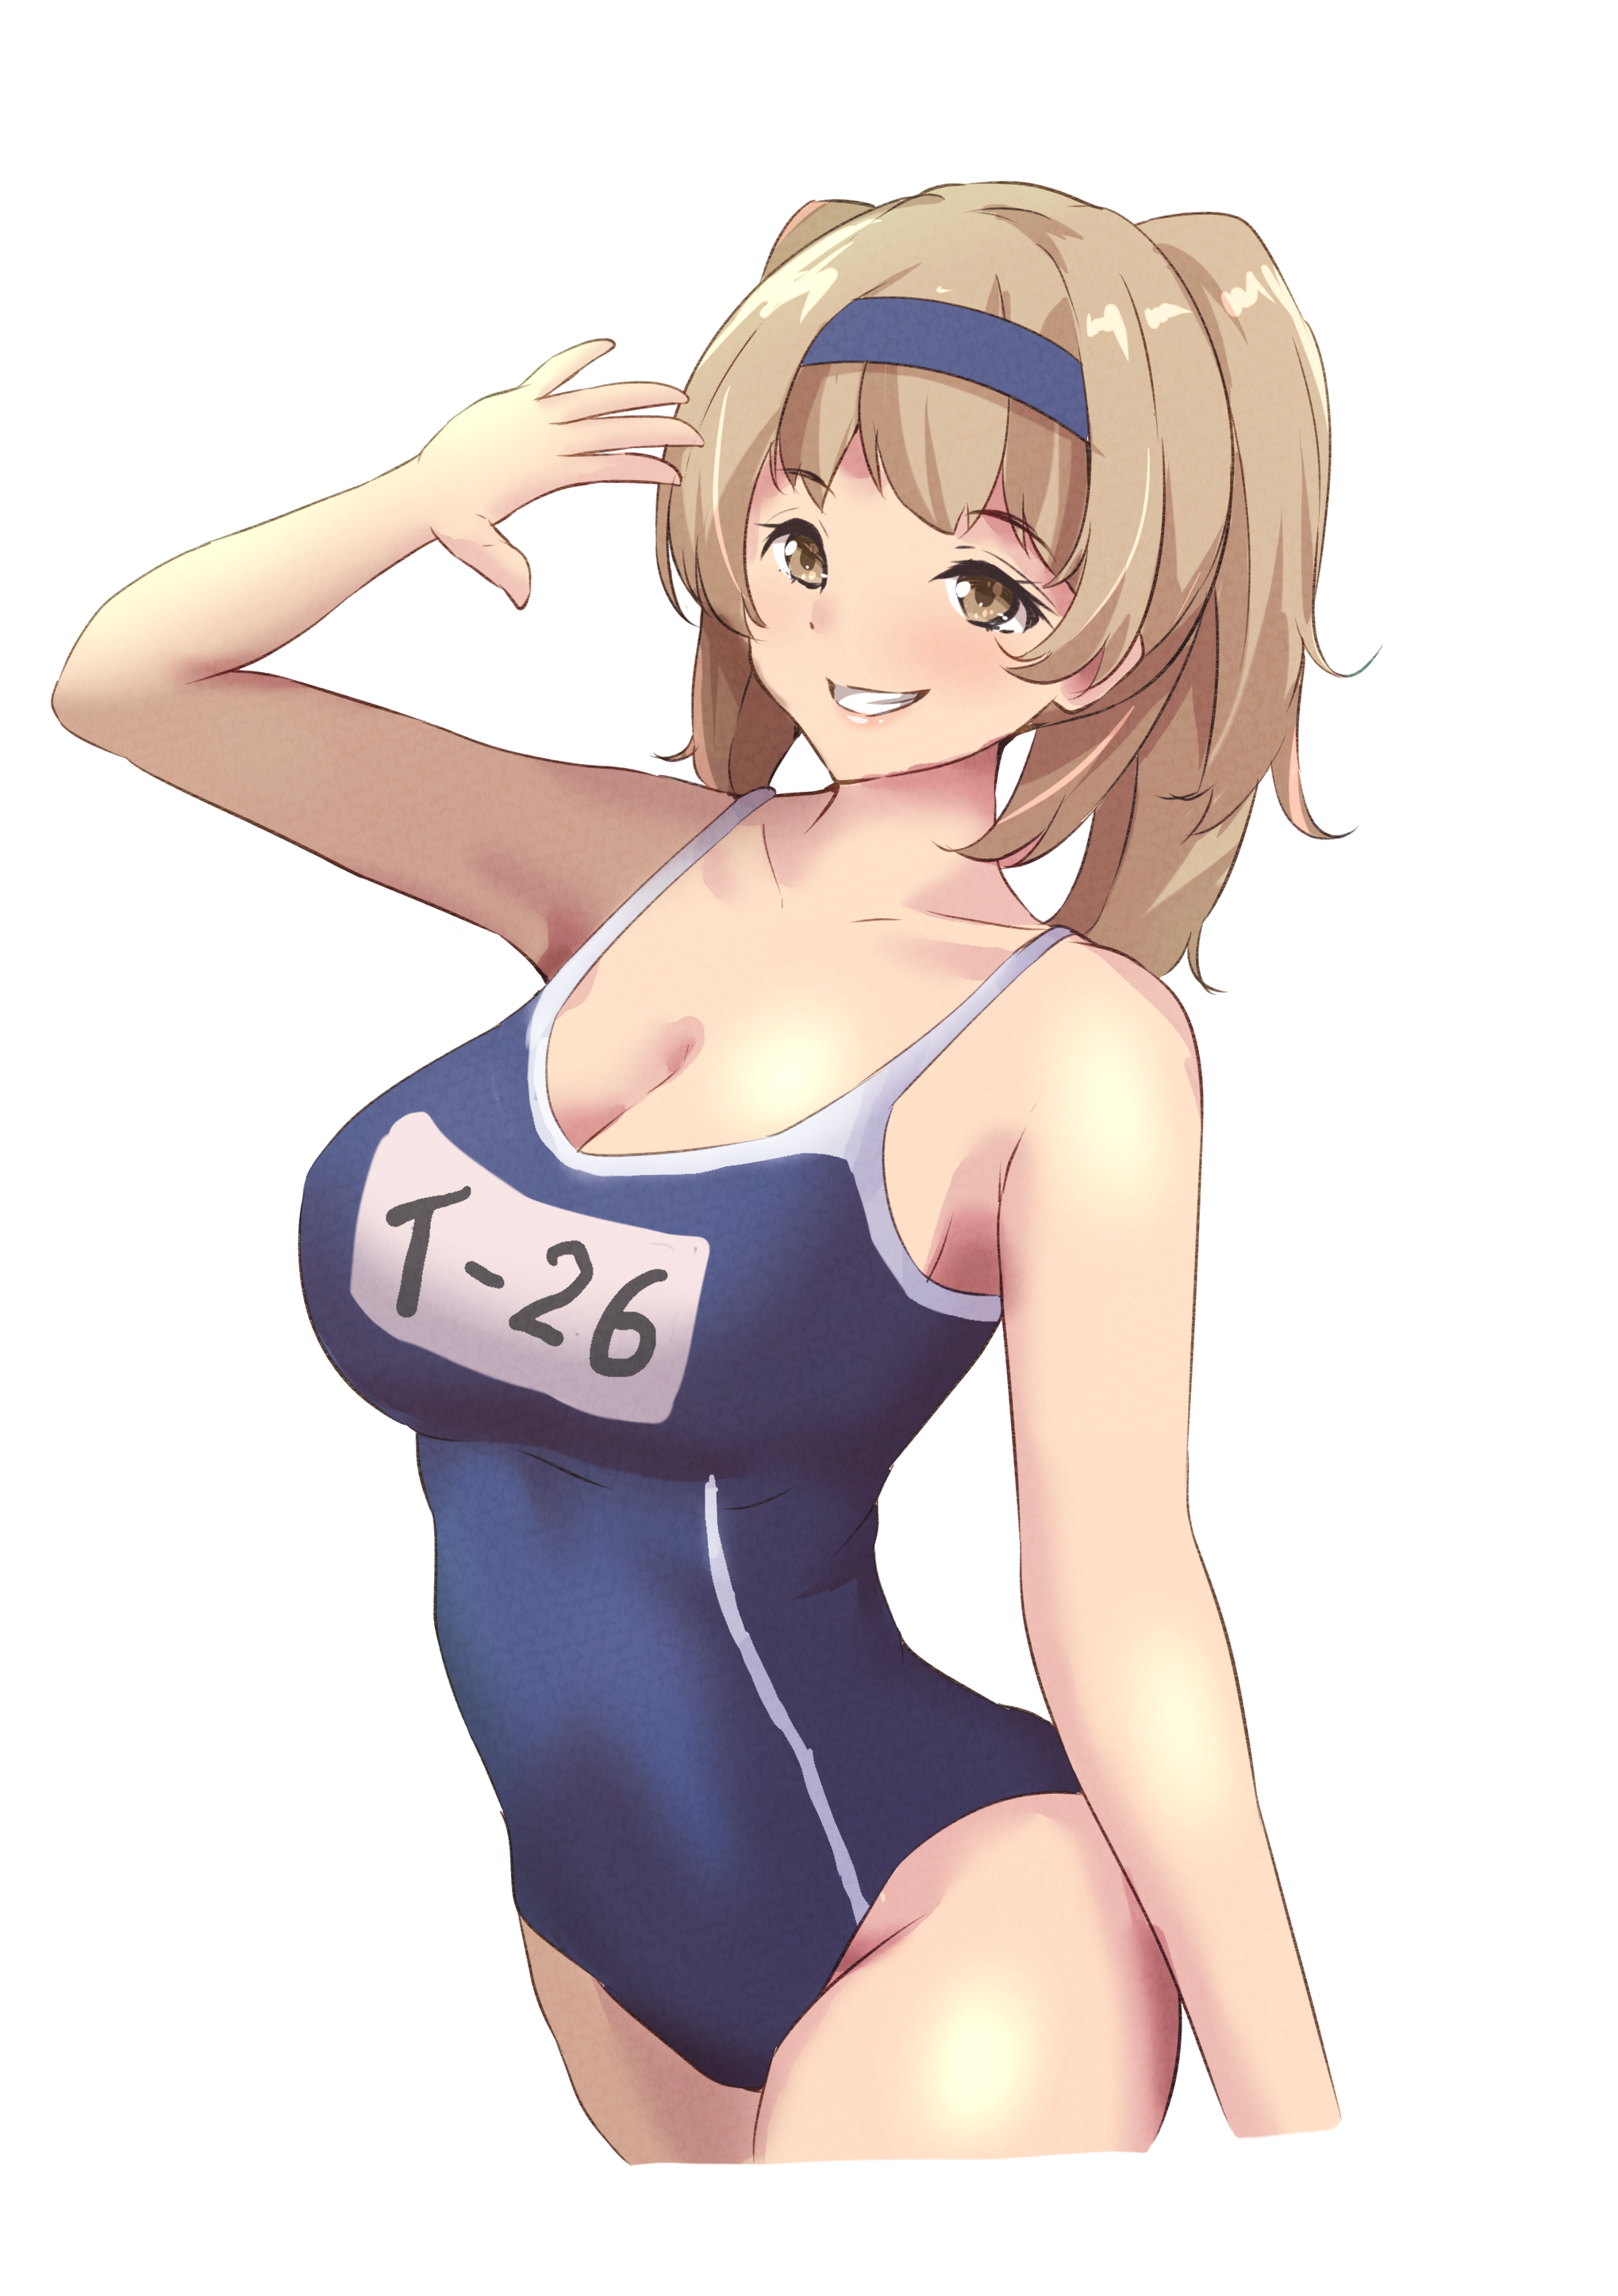 Anime 2039x2894 anime anime girls Kantai Collection I-26 (KanColle) twintails brunette solo artwork digital art fan art one-piece swimsuit